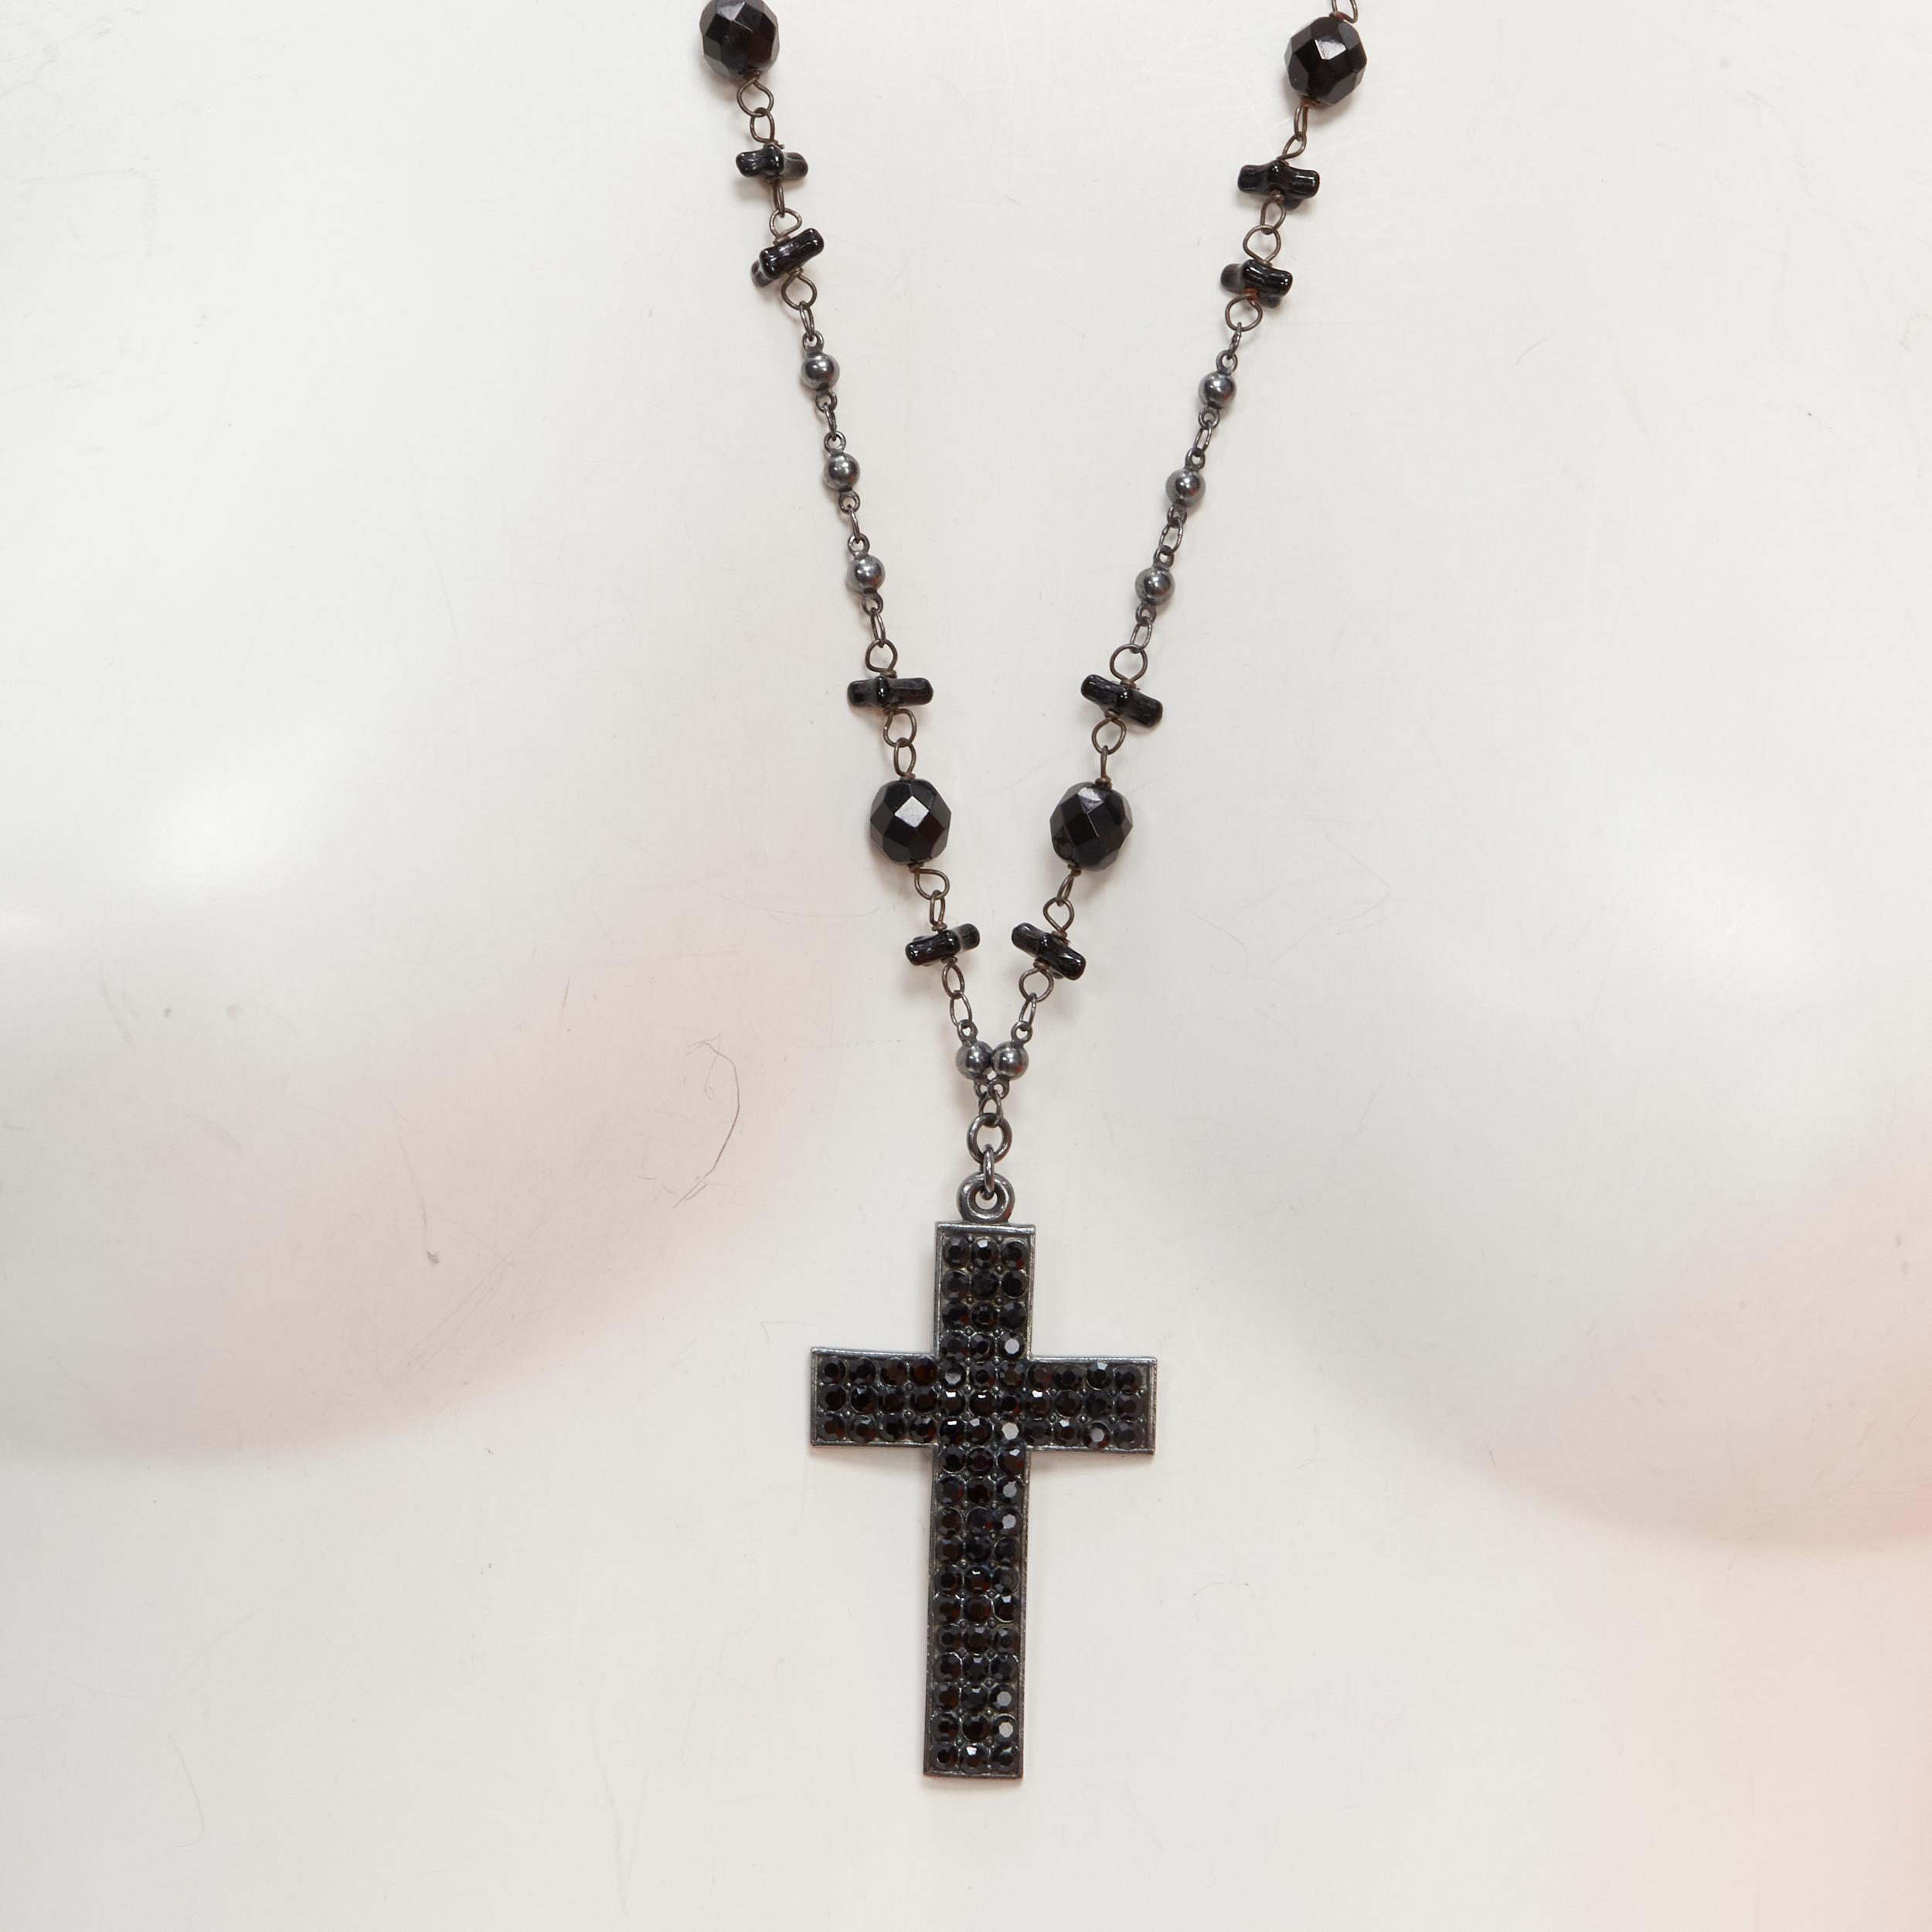 BABYLONE PARIS gunmetal crystal cross black beads rosary necklace
Reference: ANWU/A00274
Brand: Babylone Paris
Material: Metal
Color: Black
Pattern: Barocco
Closure: Lobster Clasp

CONDITION:
Condition: Excellent, this item was pre-owned and is in